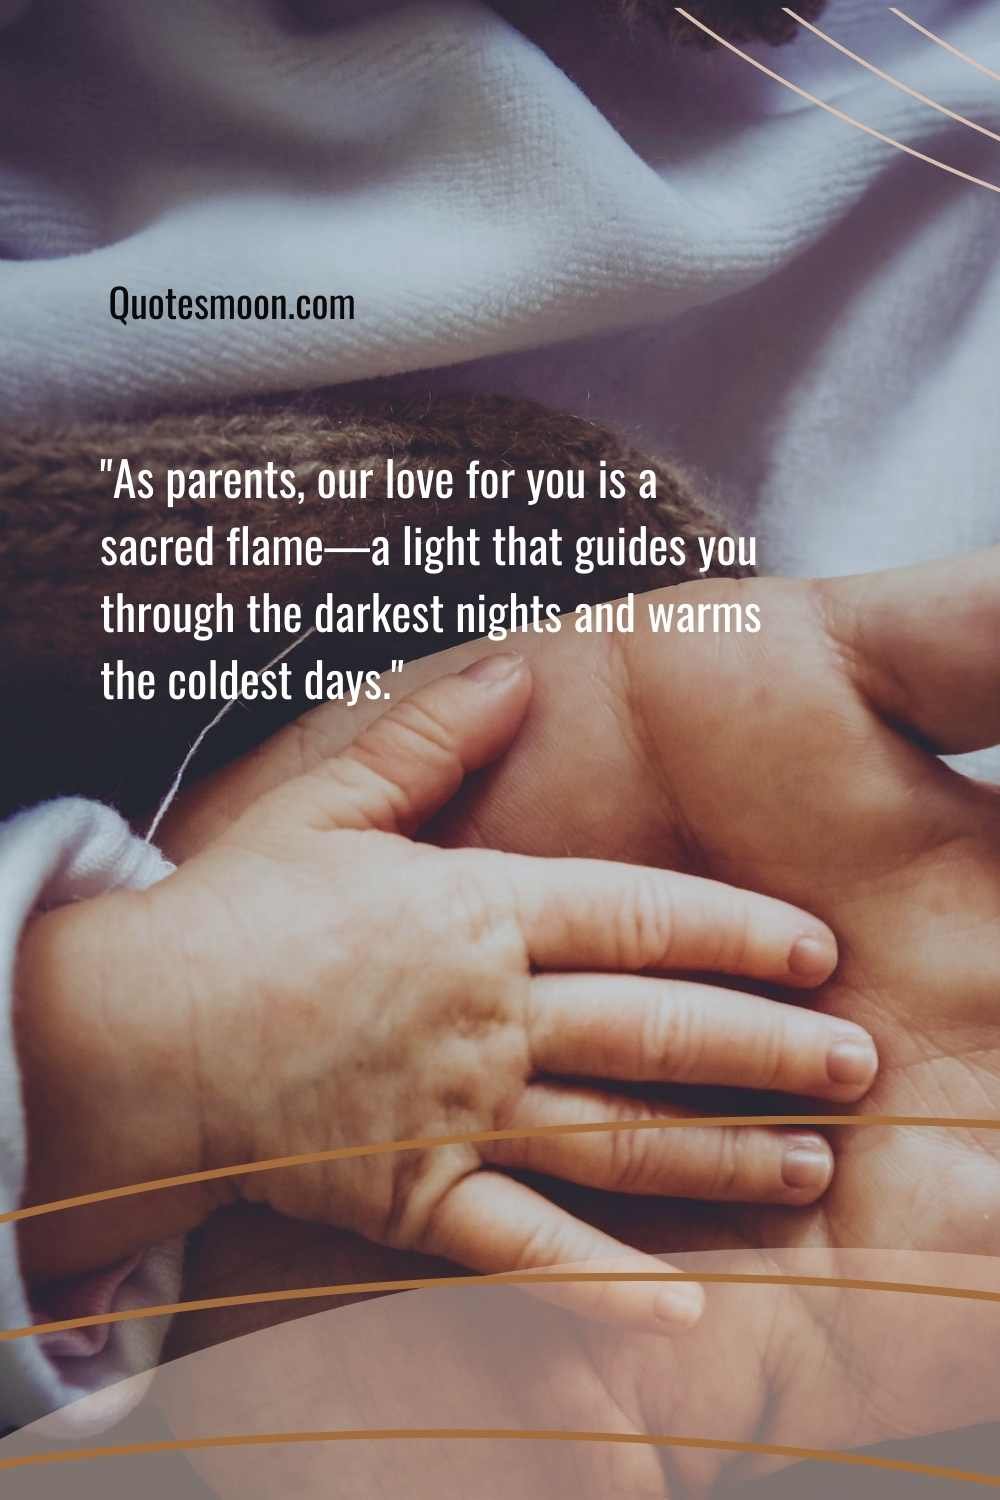 Heart Warming Mother And Son Quotes with image HD